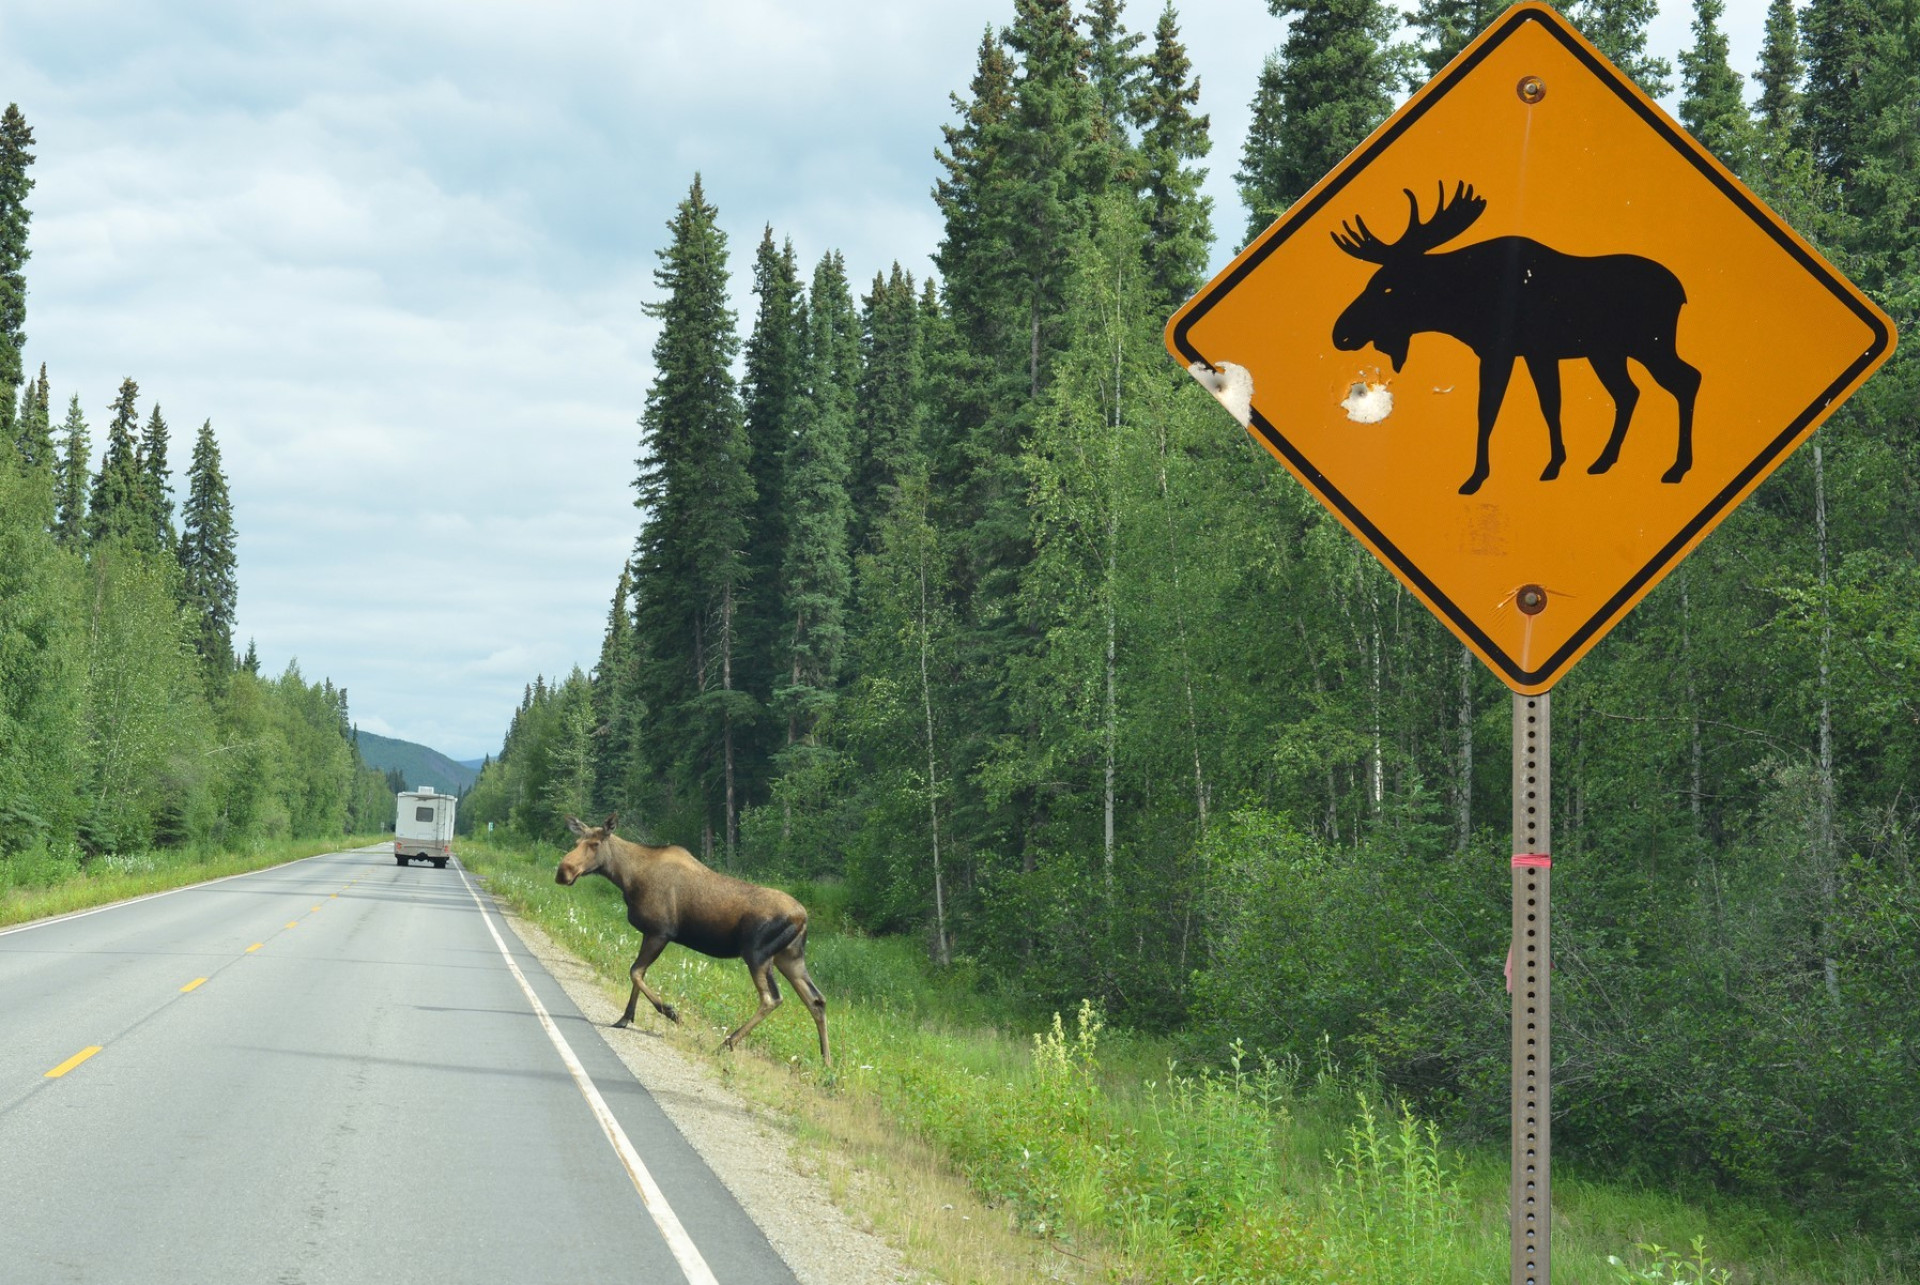 It will seem like Ontario continues on forever on this leg of the journey, but enjoy the ride and stop at as many lookouts as you can. Keep a keen eye out for deer and moose crossings though!<p><a href="https://www.msn.com/en-us/community/channel/vid-7xx8mnucu55yw63we9va2gwr7uihbxwc68fxqp25x6tg4ftibpra?cvid=94631541bc0f4f89bfd59158d696ad7e">Follow us and access great exclusive content every day</a></p>